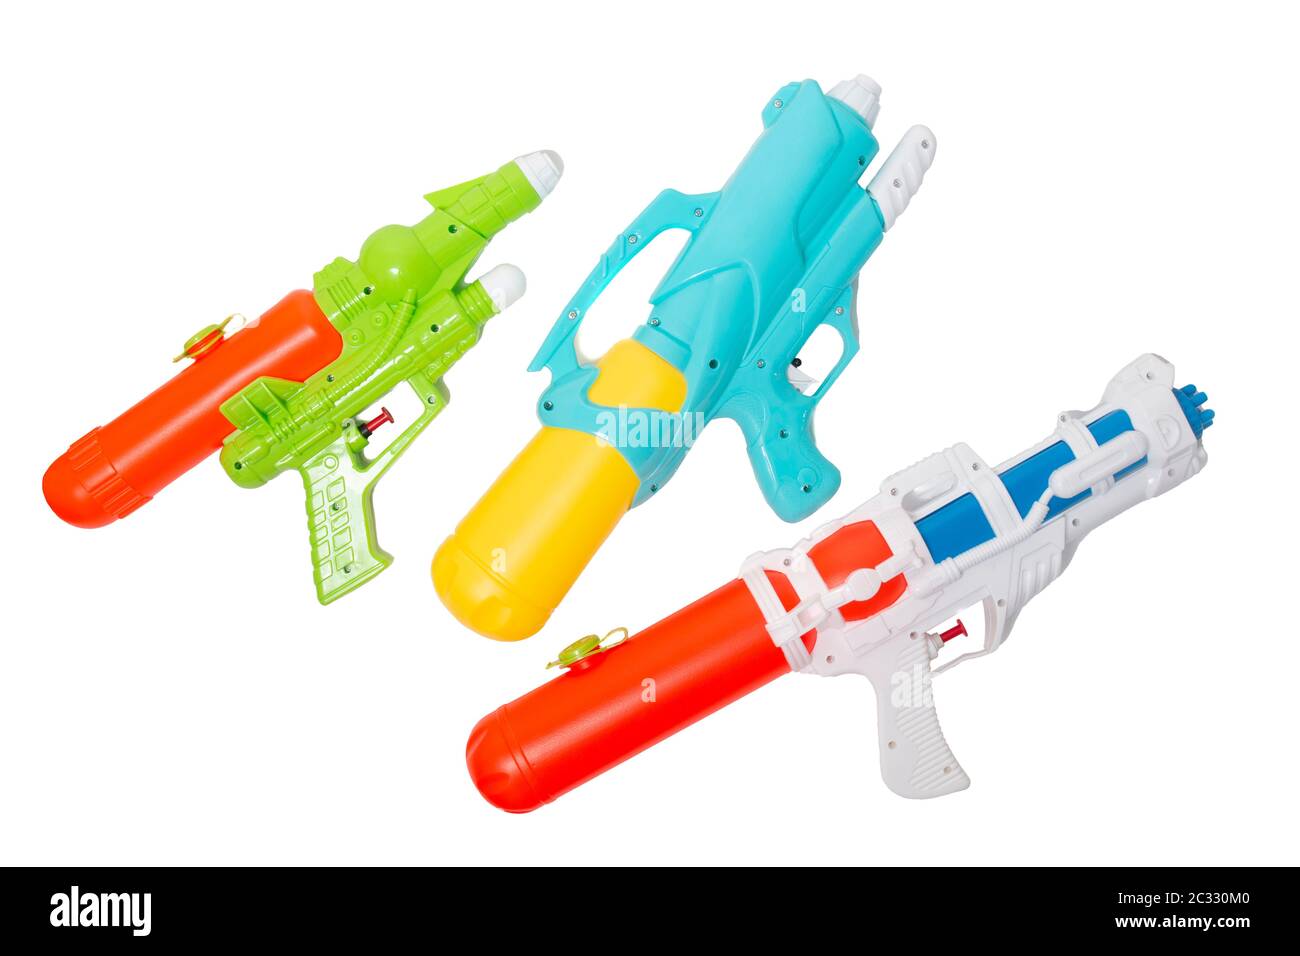 Colorful plastic water guns isolated on a white background. Stock Photo